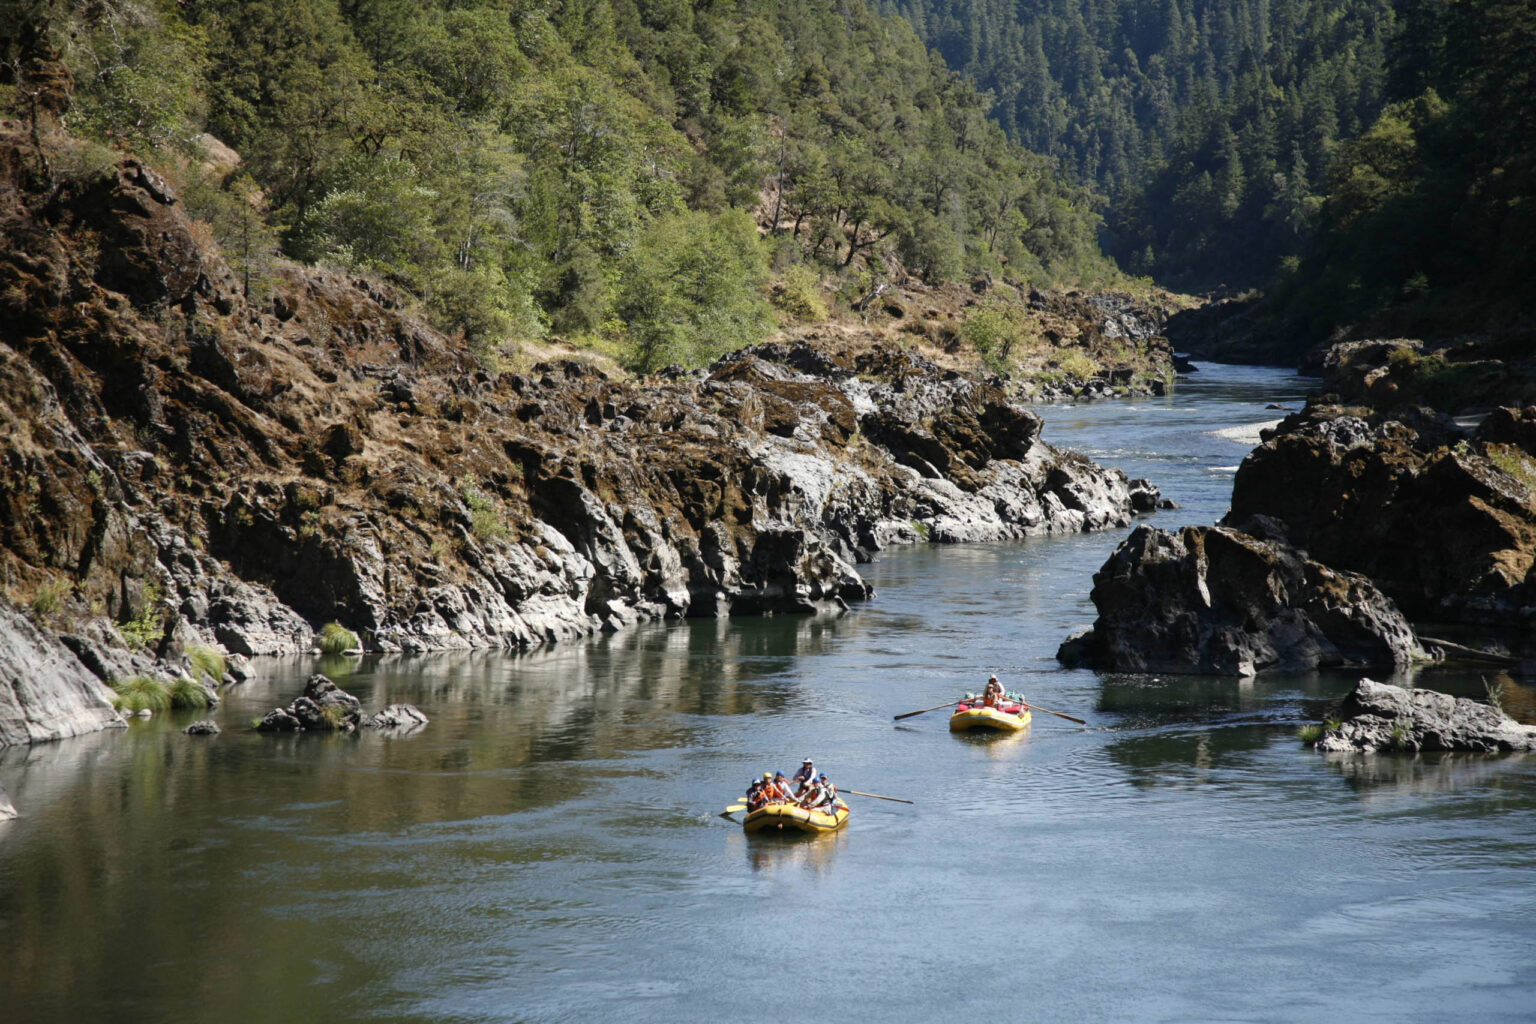 Groups rafting down the Rogue River in Oregon.